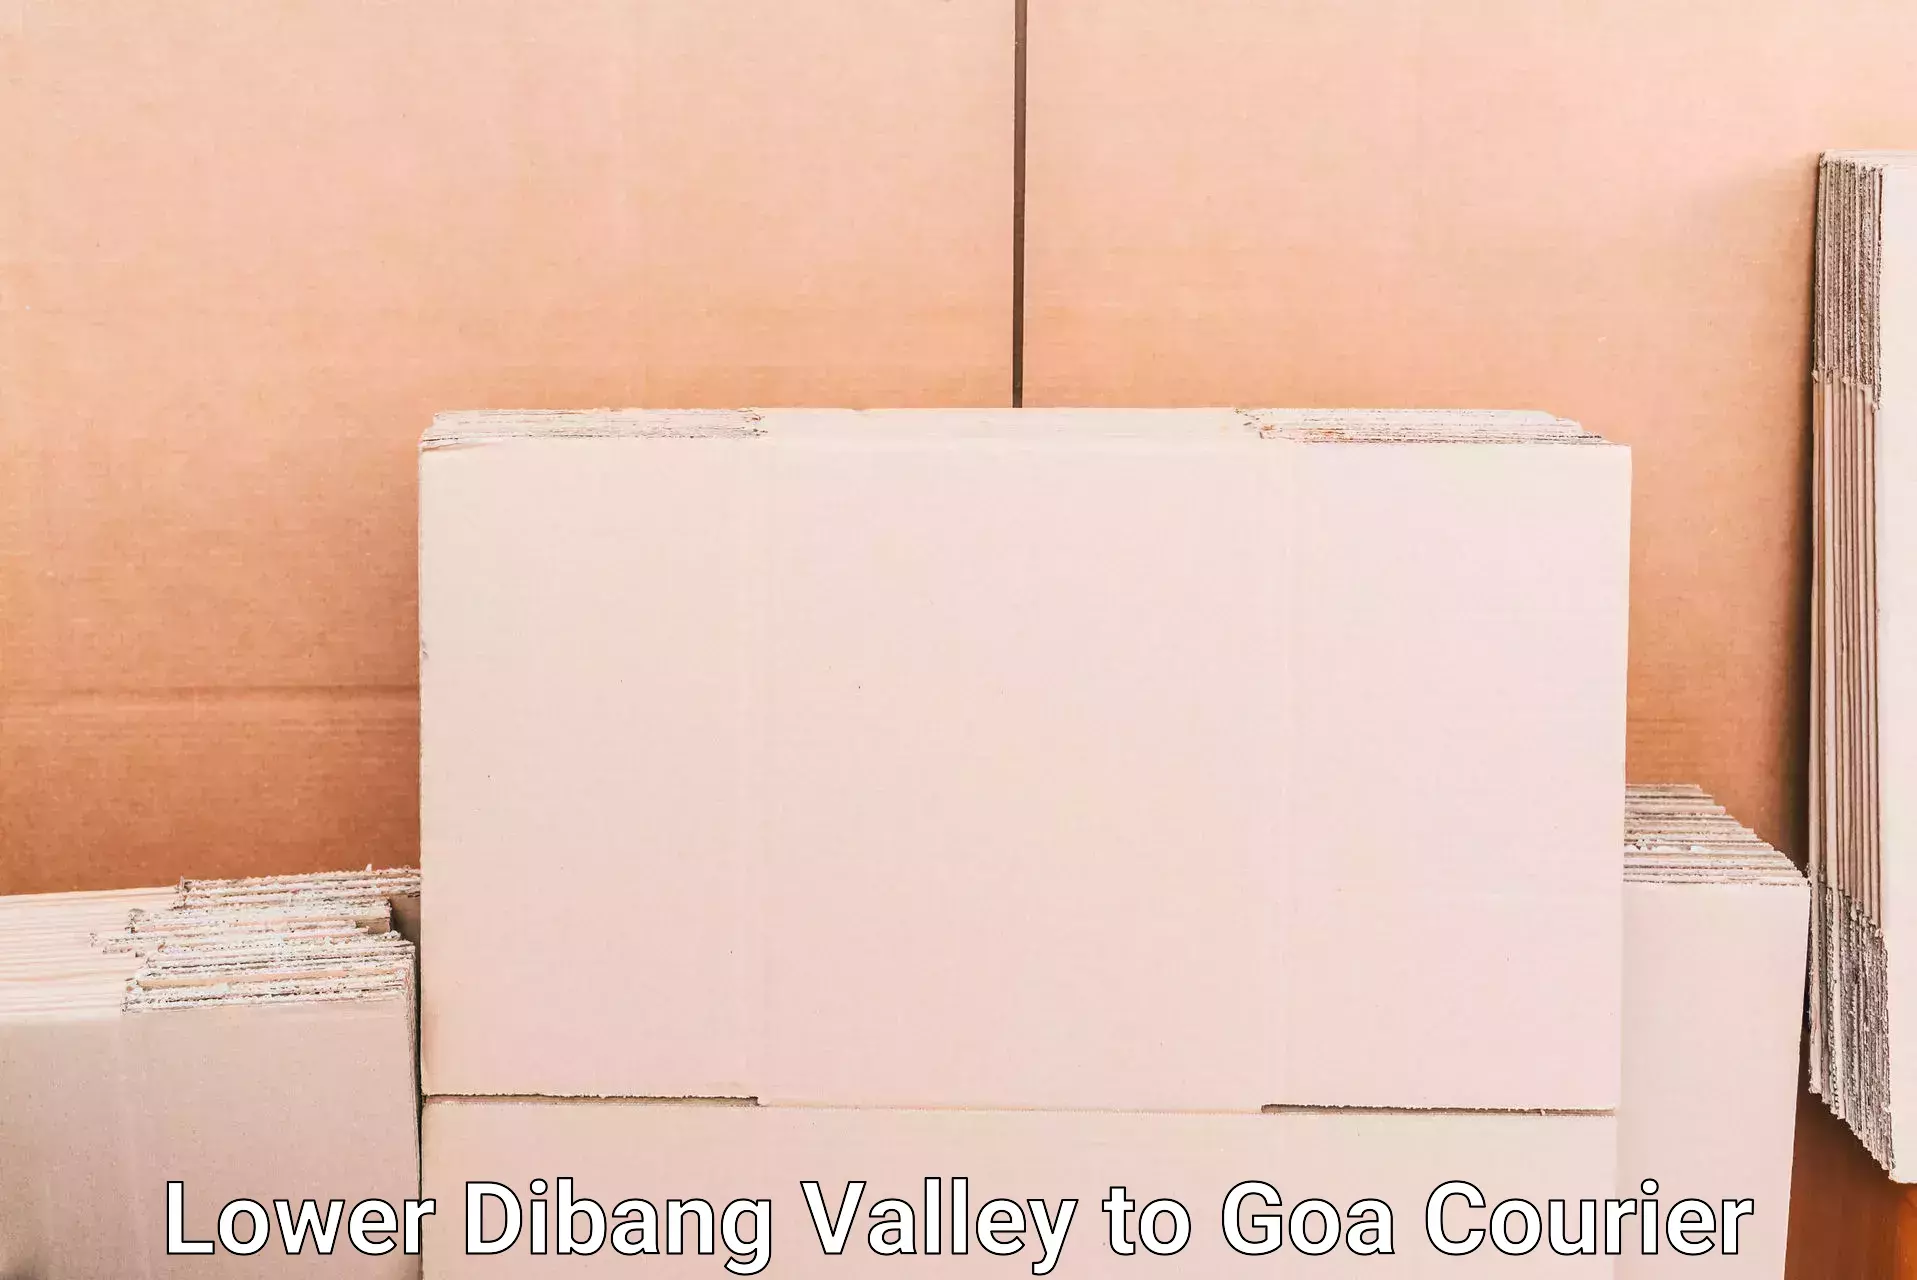 Luggage transport consultancy Lower Dibang Valley to Goa